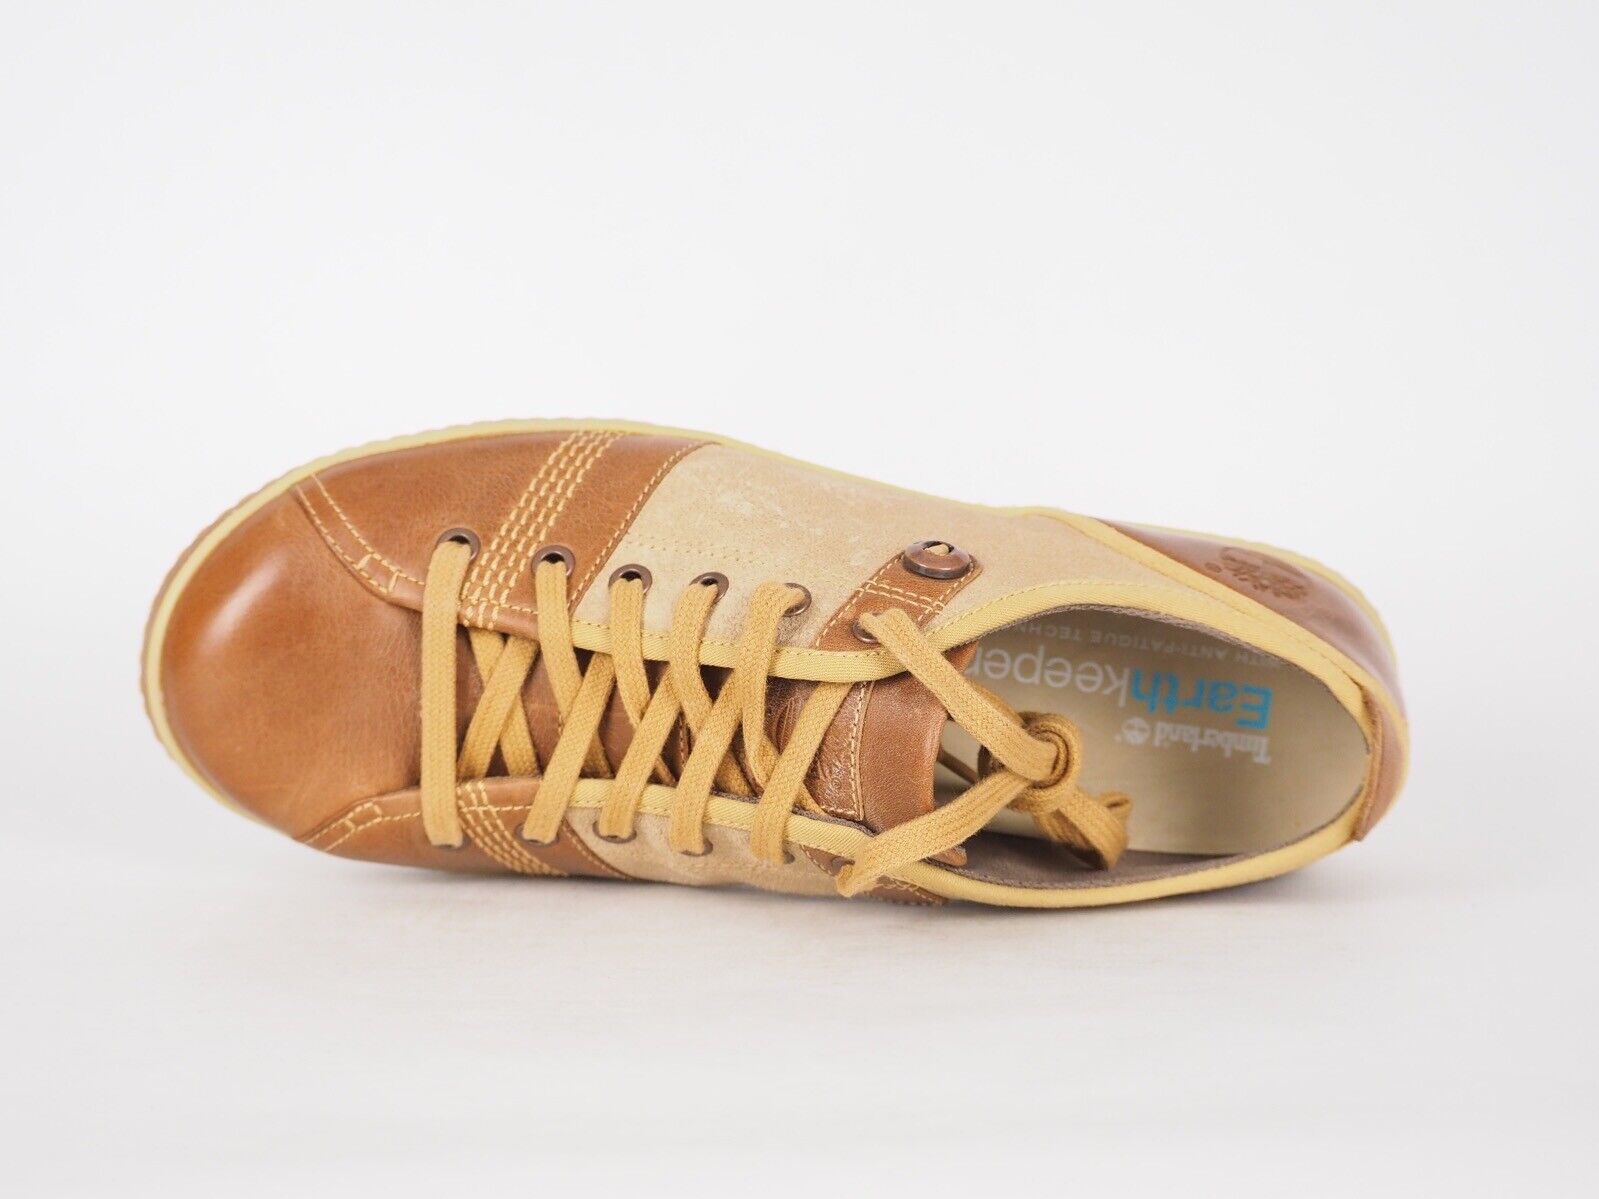 Womens Timberland Faulkner 24694 Tan Leather Lace Up Everyday Casual Shoes